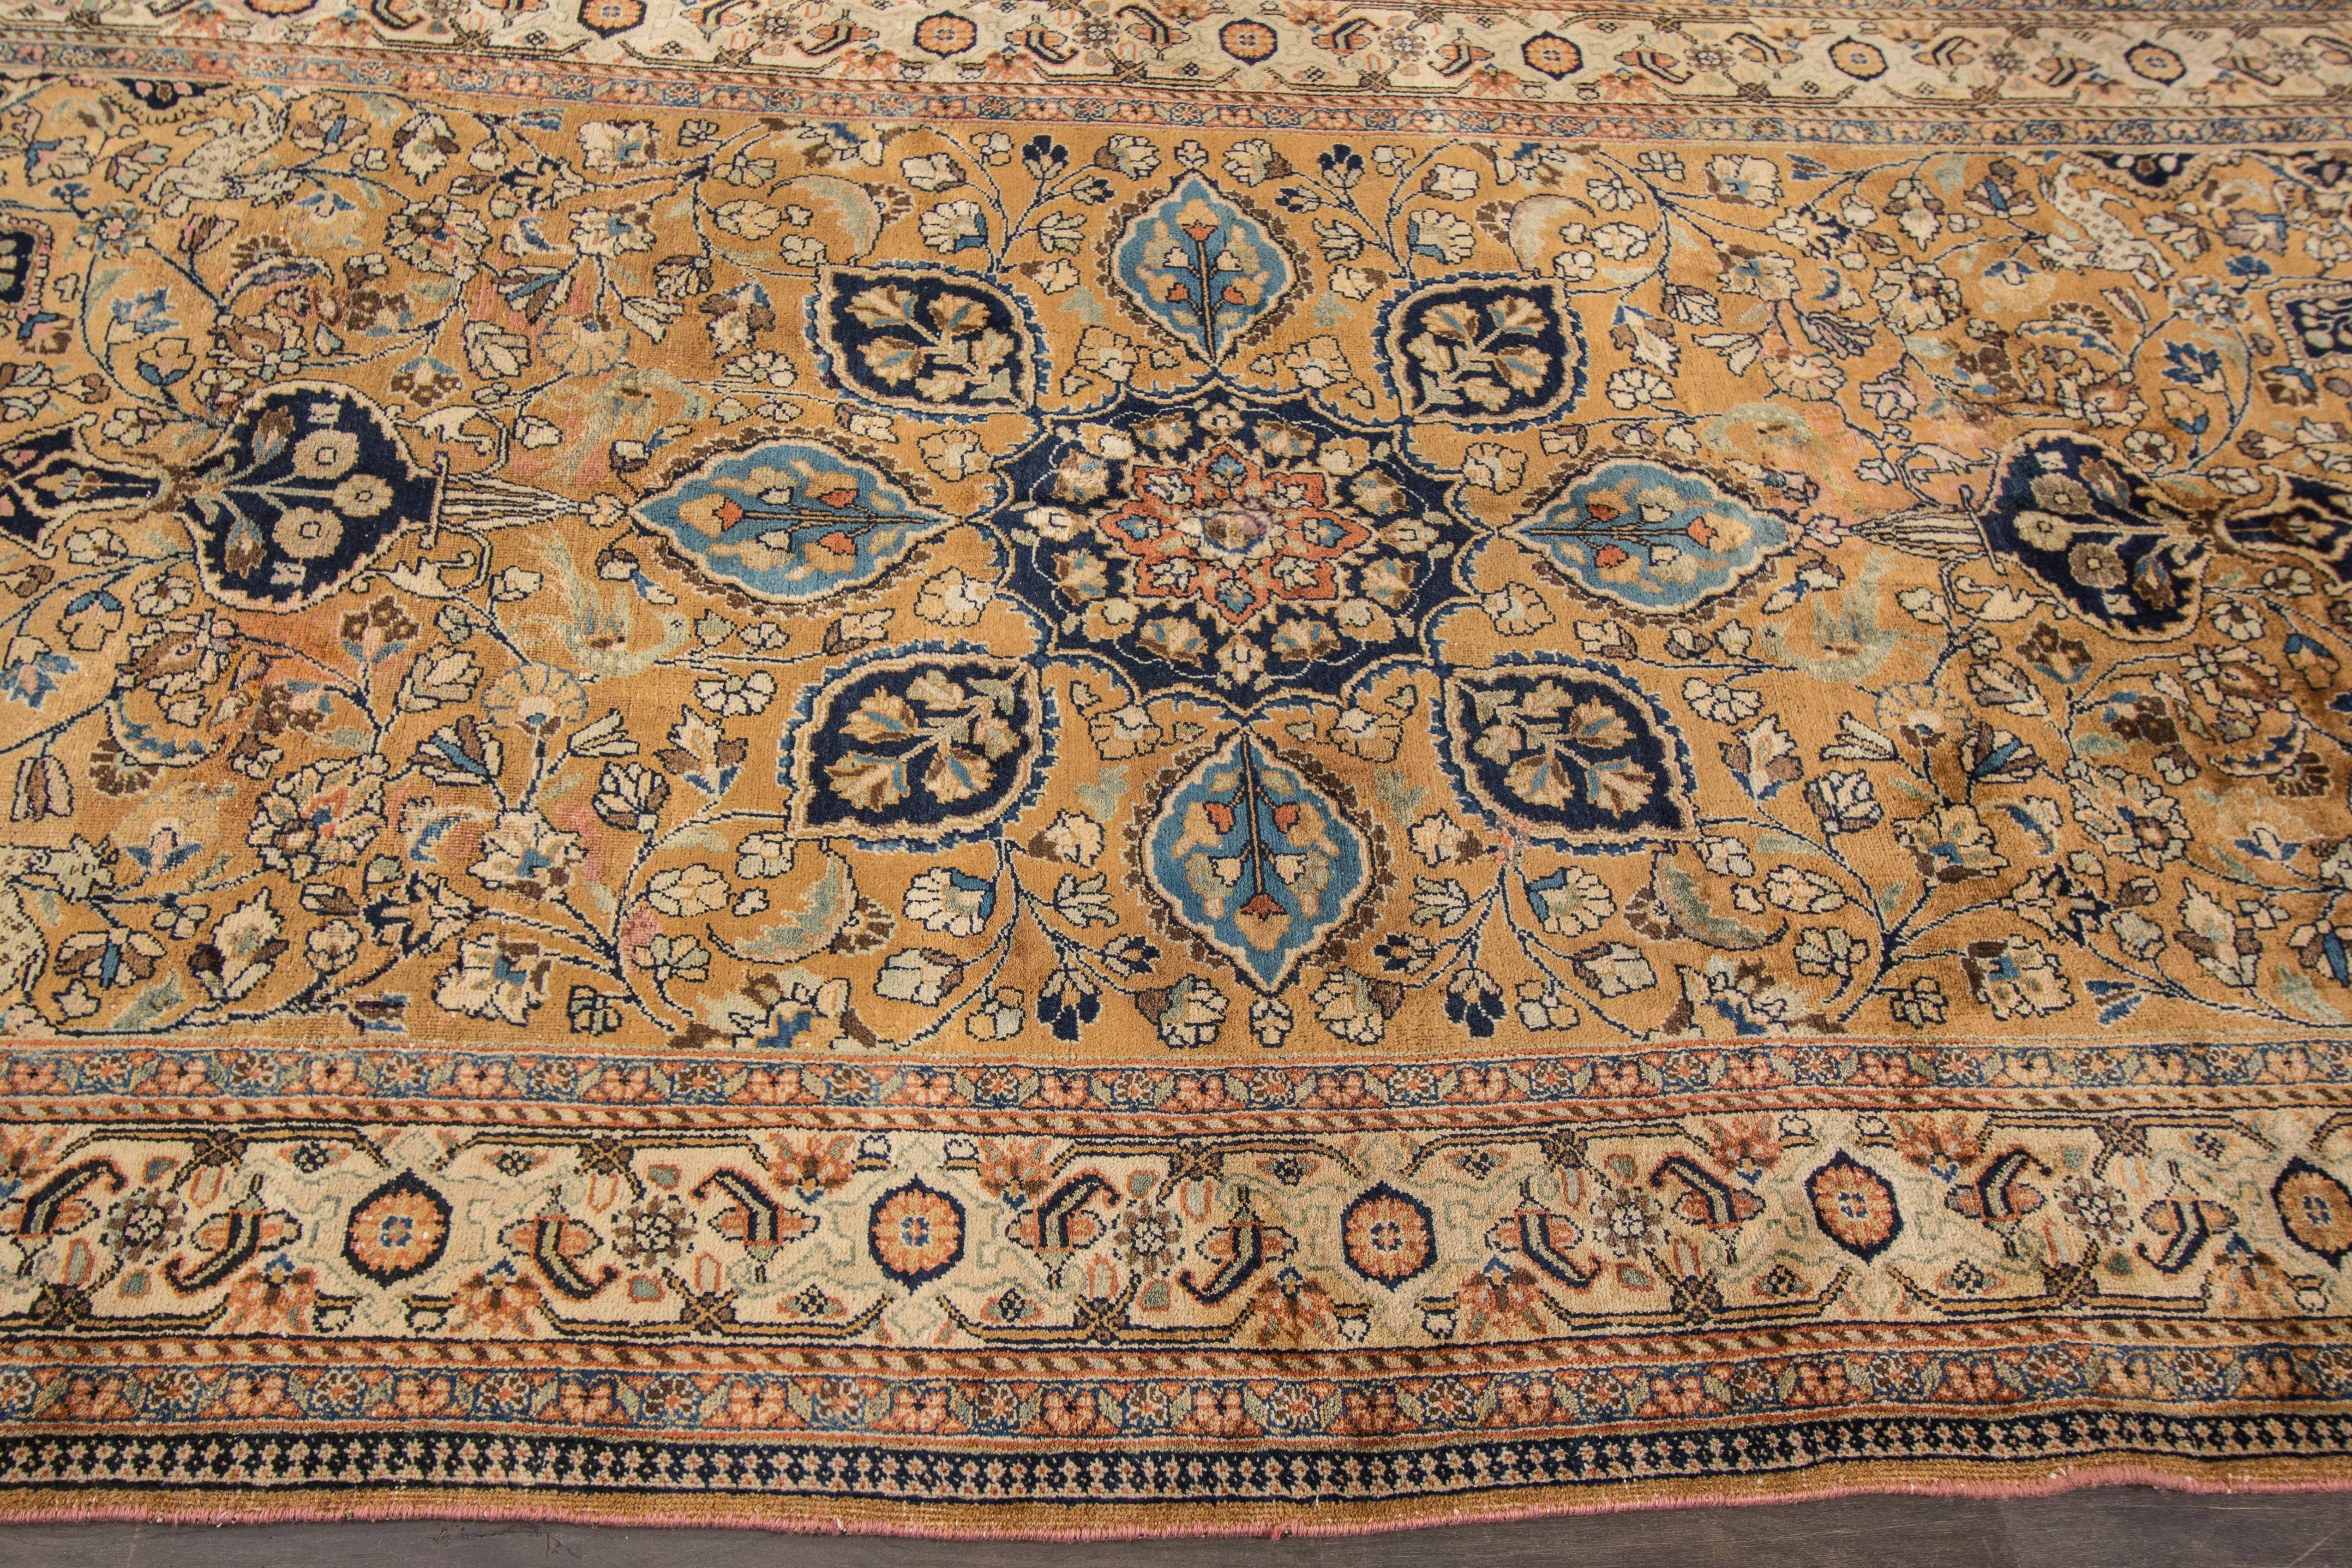 This beautiful Vintage Woven Persian Mashad hand-knotted design rug will make your floor look splendid. This collection is made in wool. It's measures are: 5' x 9'.9.
This Vintage Woven Persian Mashad Rug was made in Iran